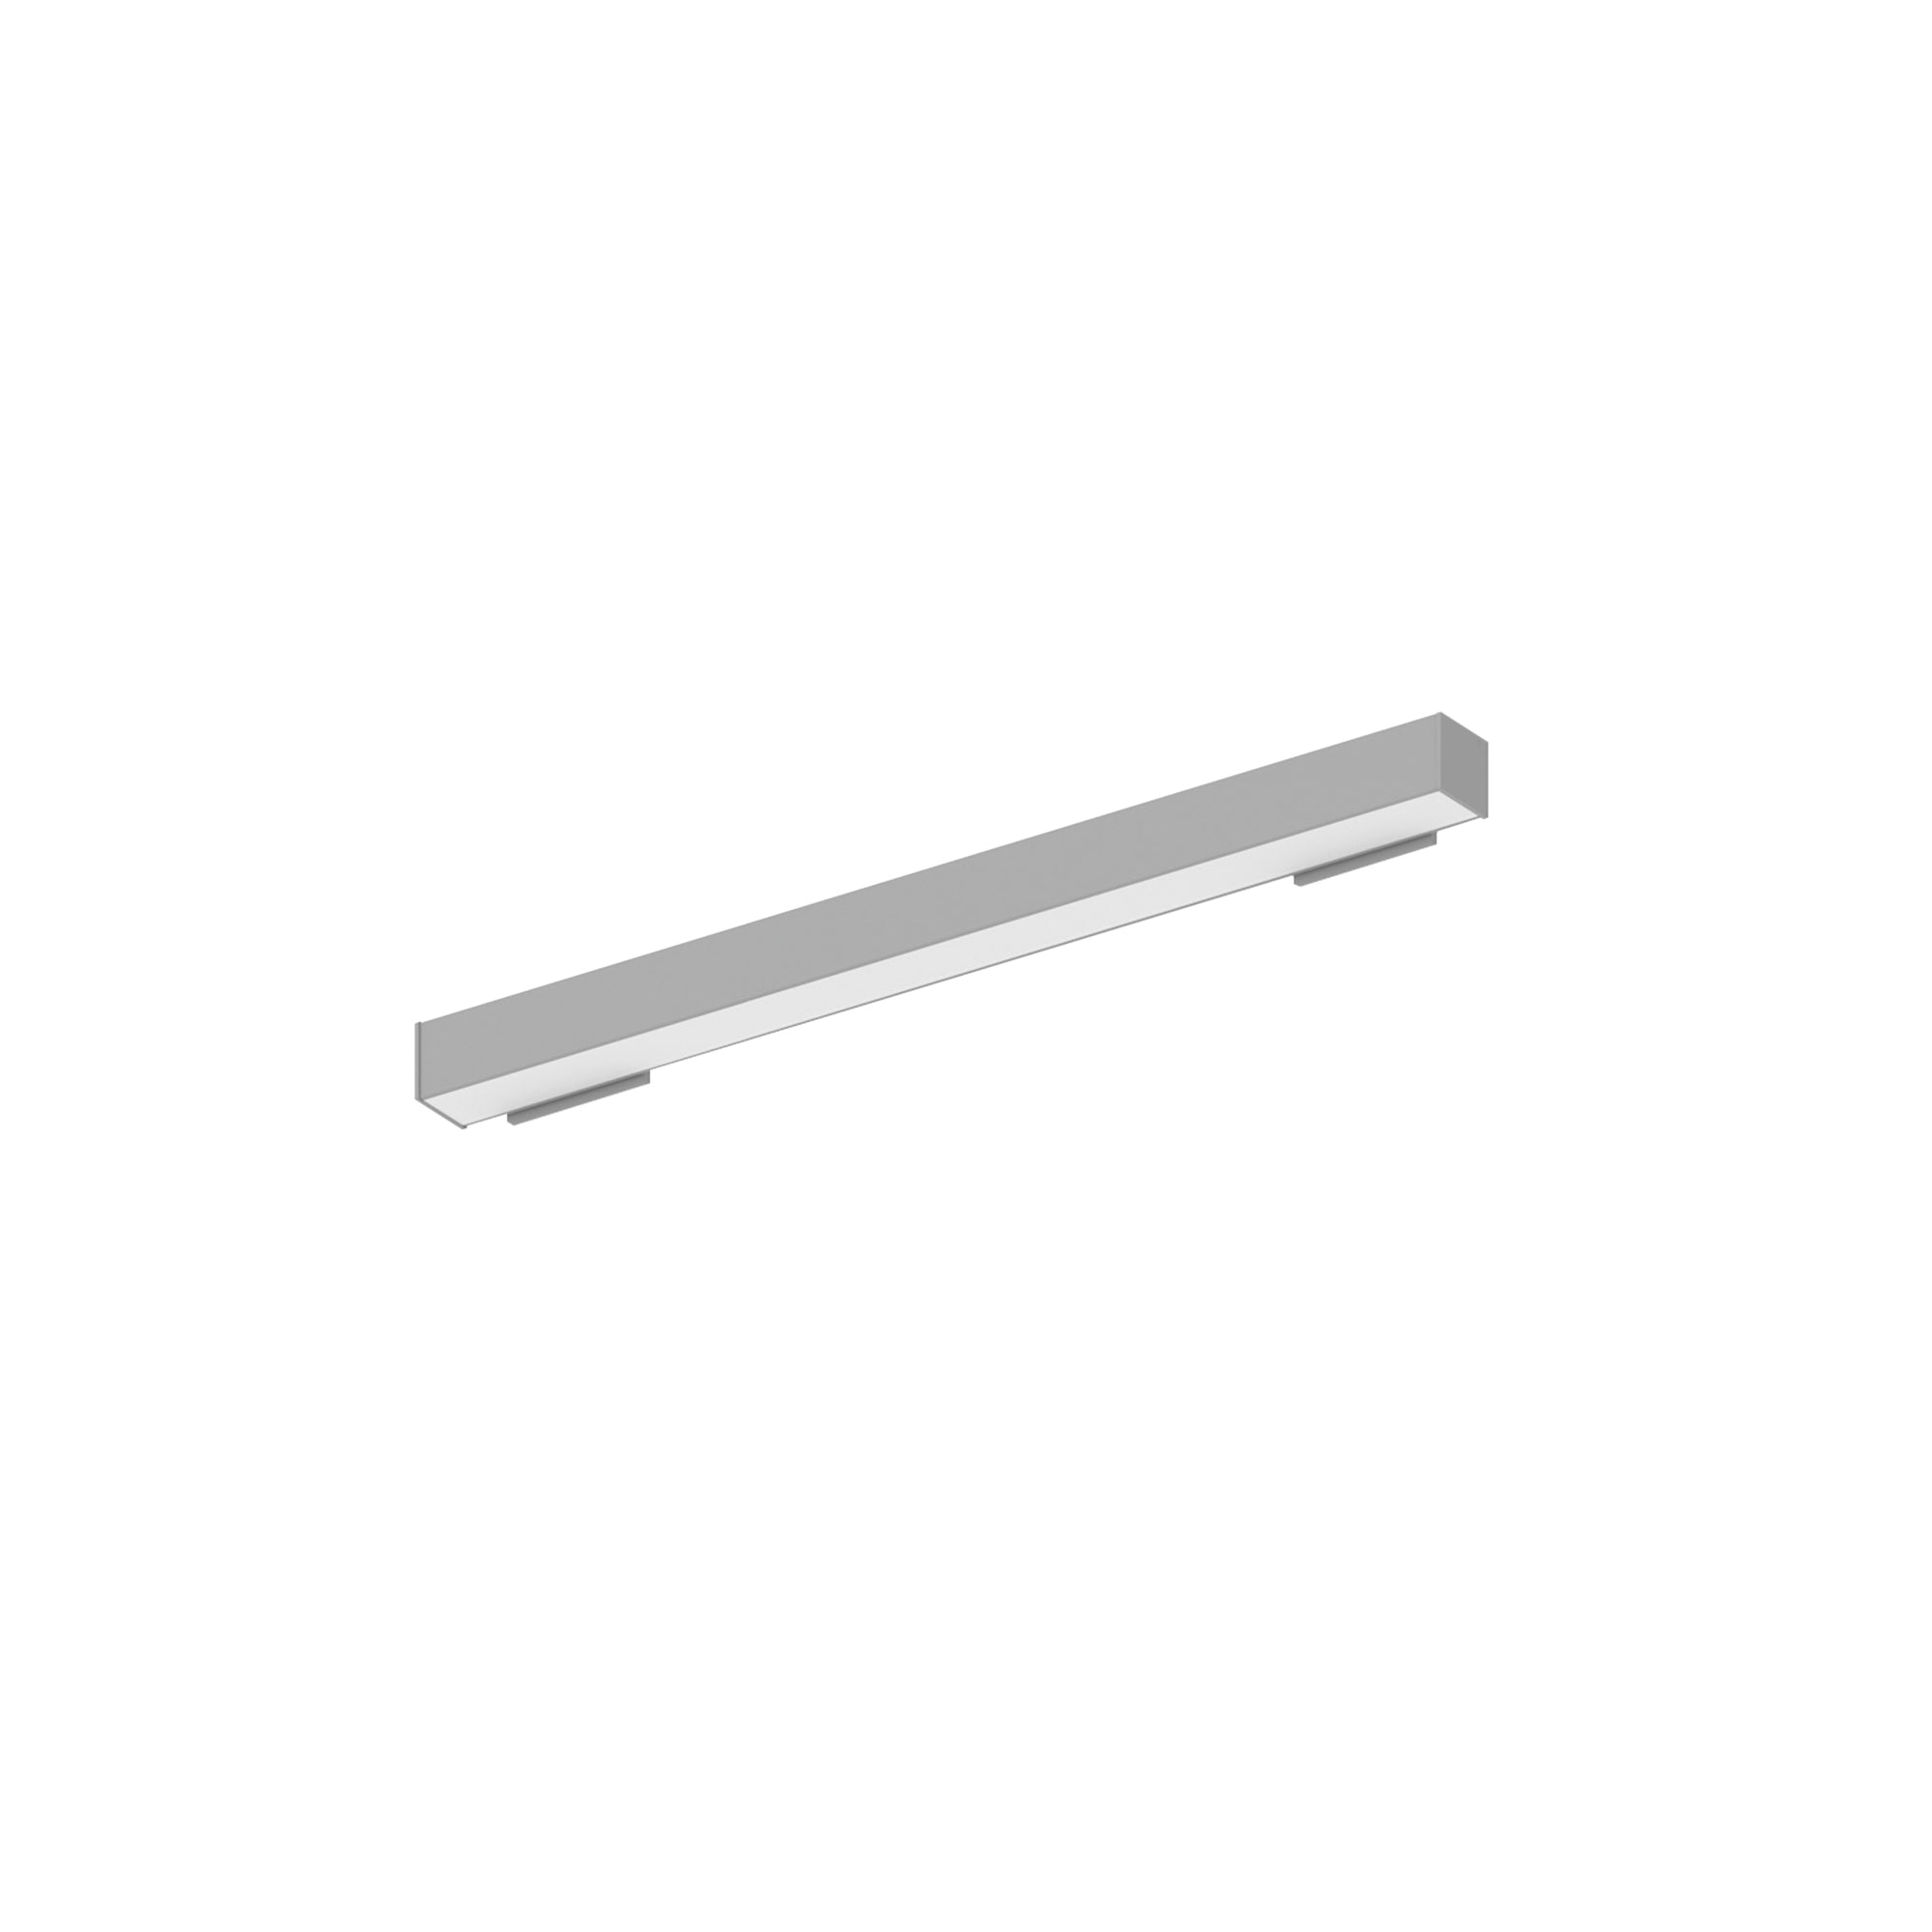 Nora Lighting NWLIN-21030A/L2-R2P - Linear - 2' L-Line LED Wall Mount Linear, 2100lm / 3000K, 2 Inchx4 Inch Left Plate & 2 Inchx4 Inch Right Plate, Right Power Feed, Aluminum Finish